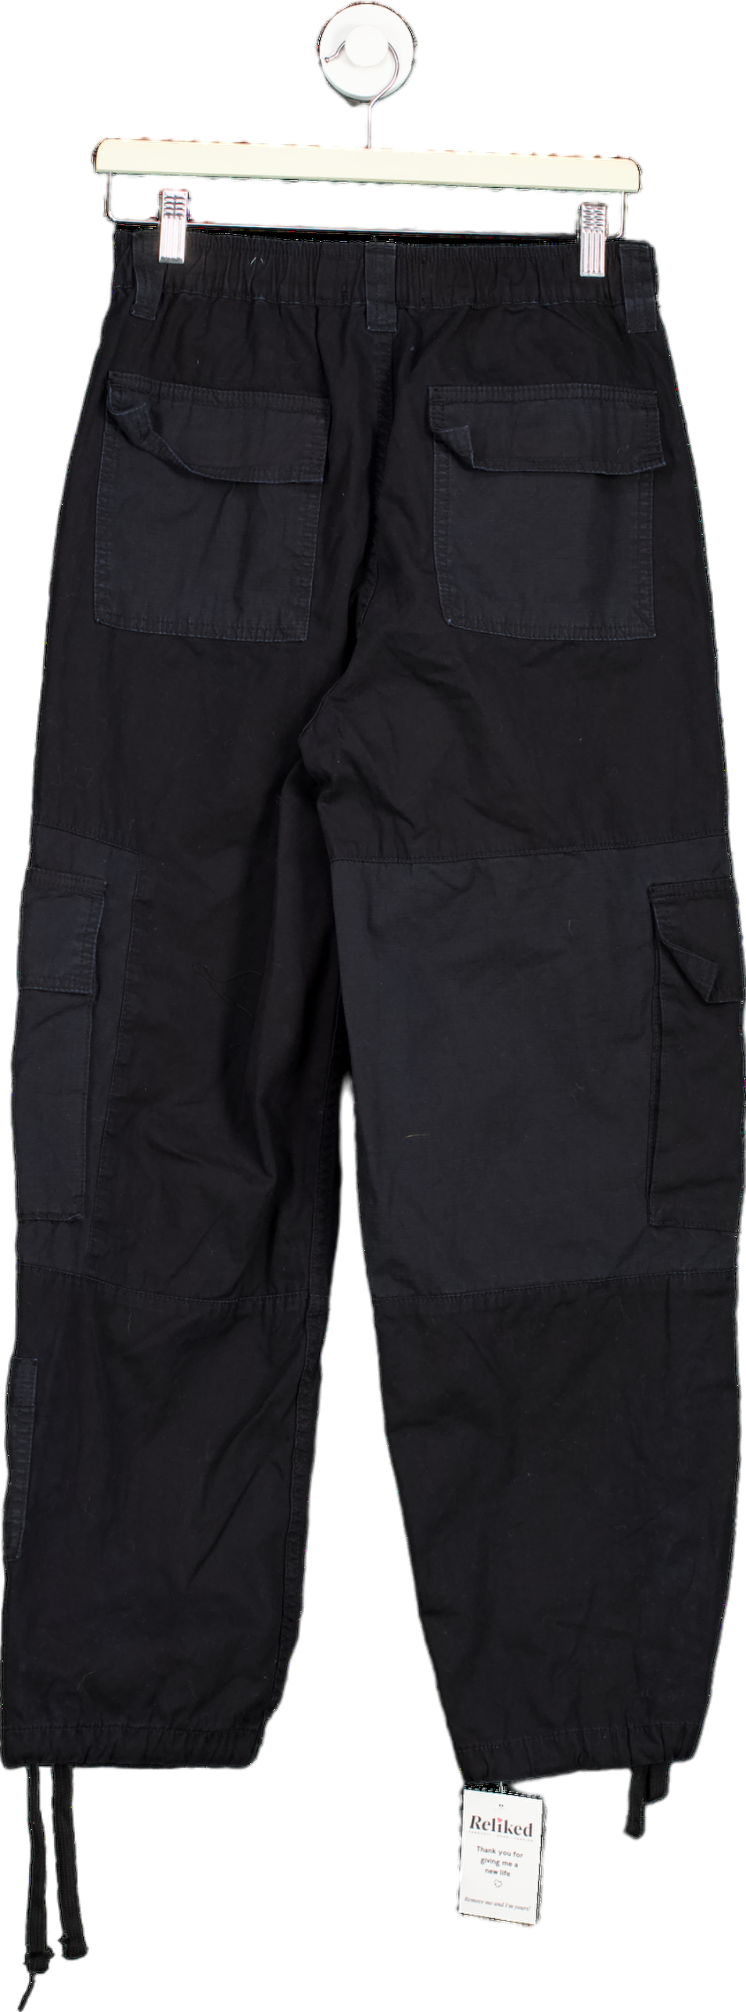 BDG Urban Outfitters Black Cargo Trousers 30W 32L